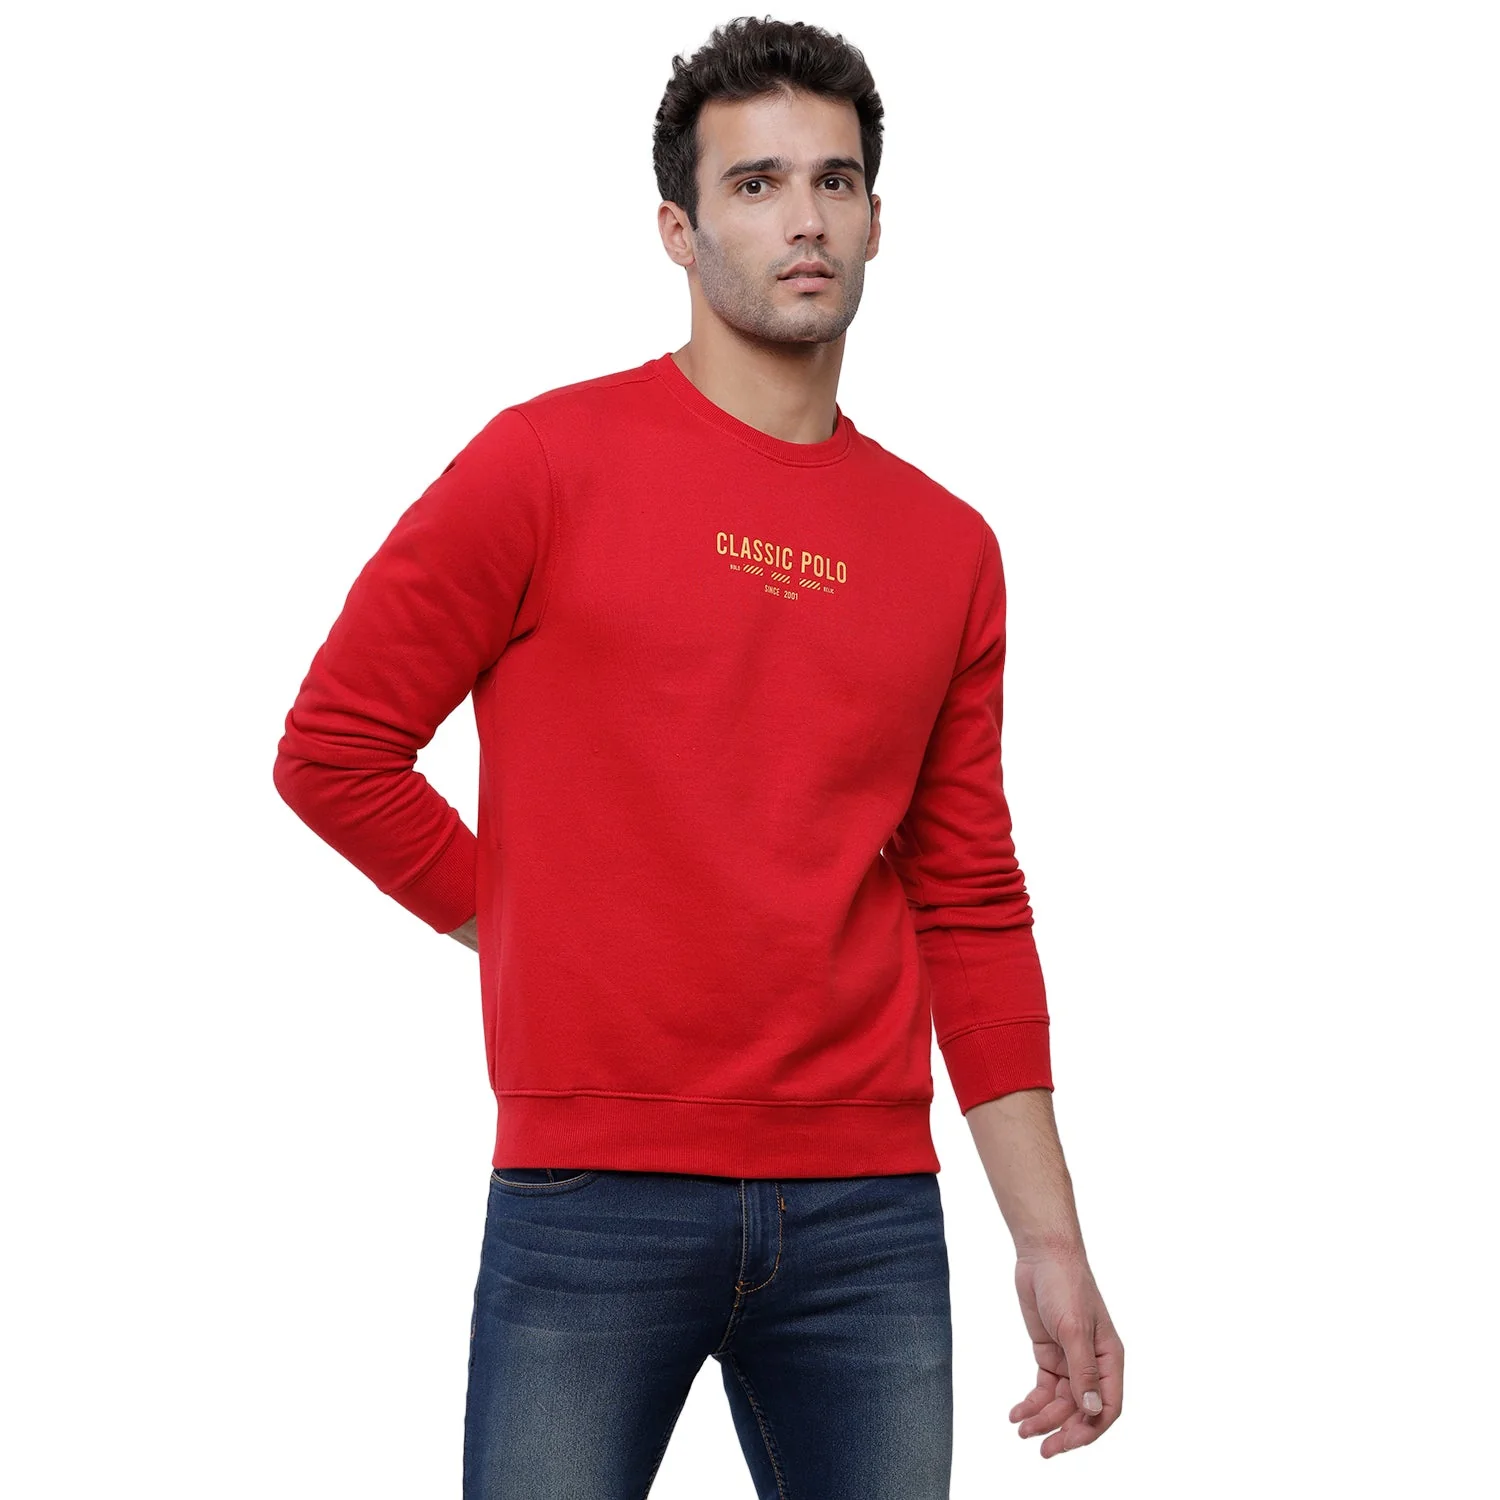 Classic Polo Men's Solid Full Sleeve Red Sweat Shirt - CPSS-347 B